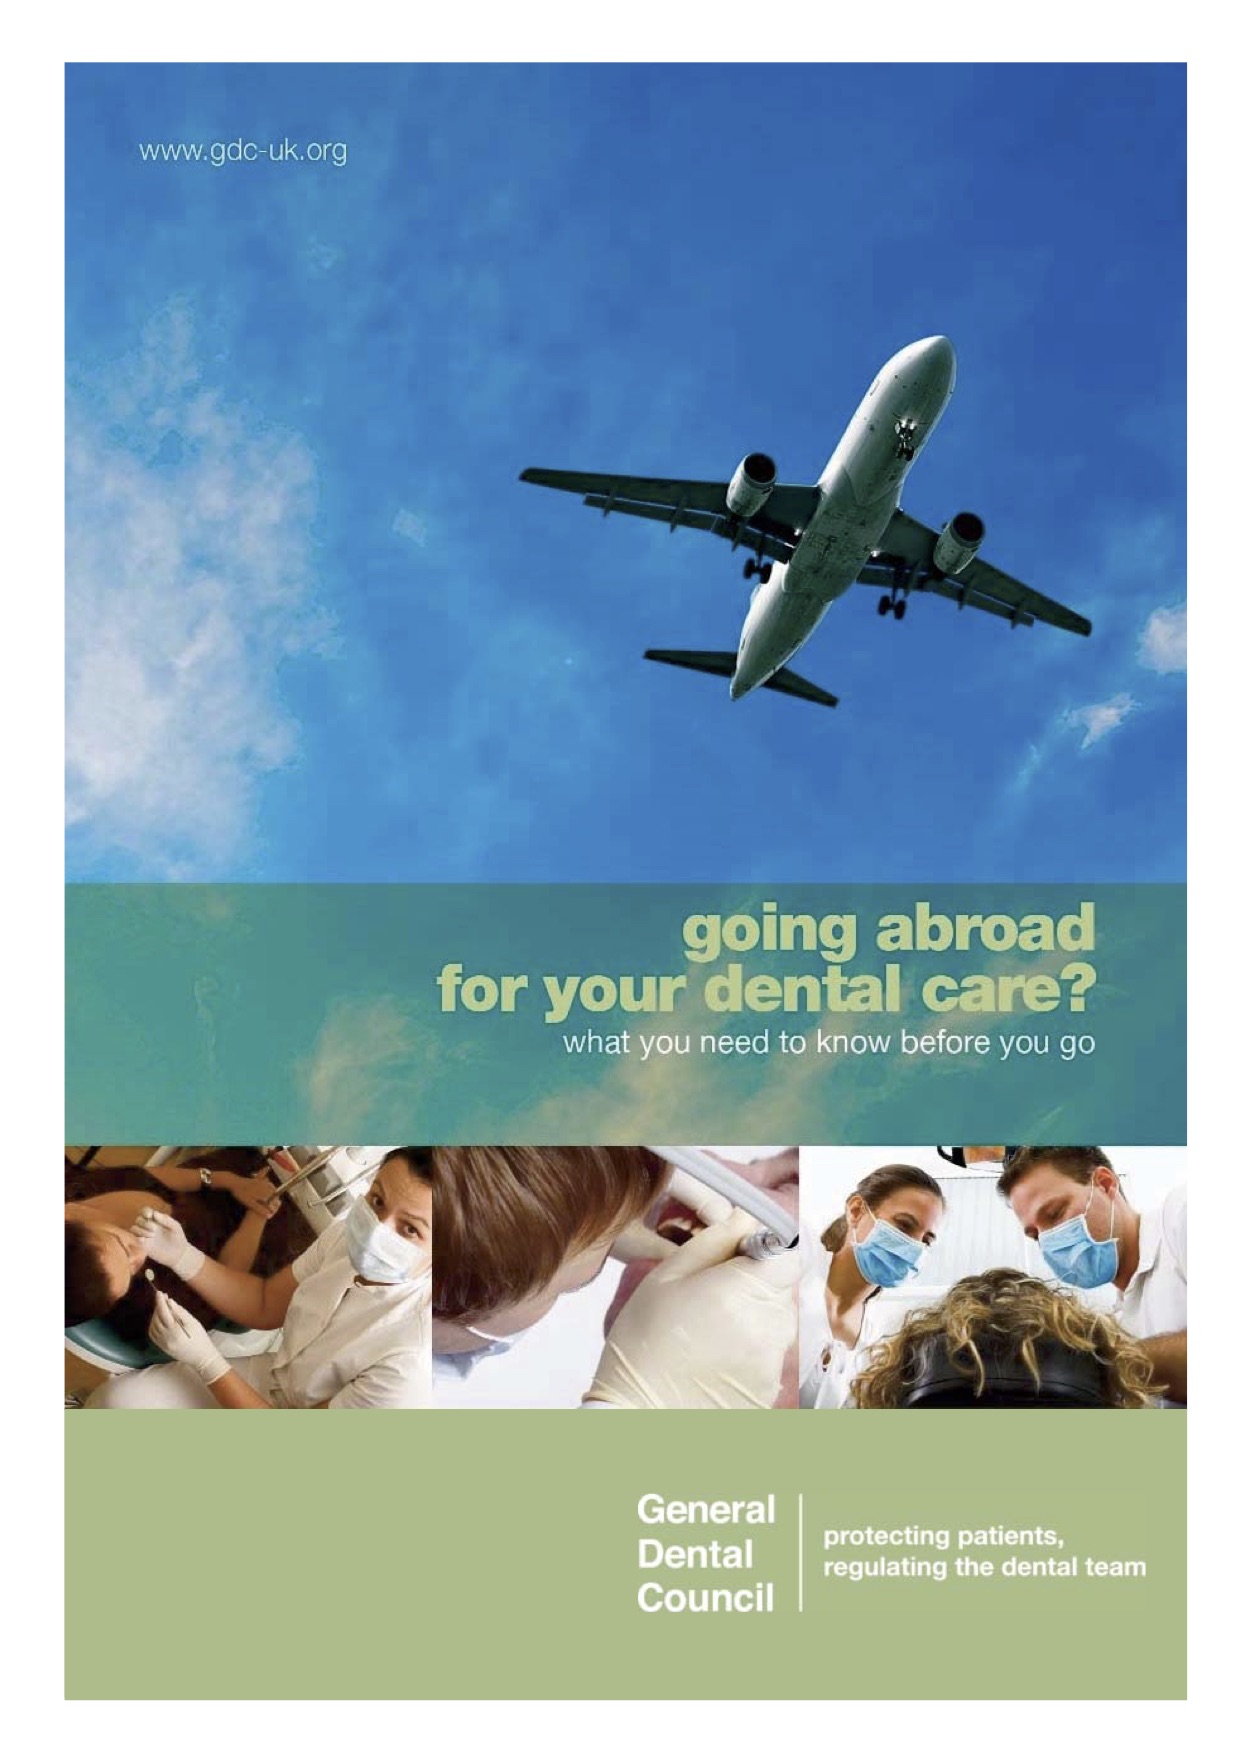 travel abroad for dental work